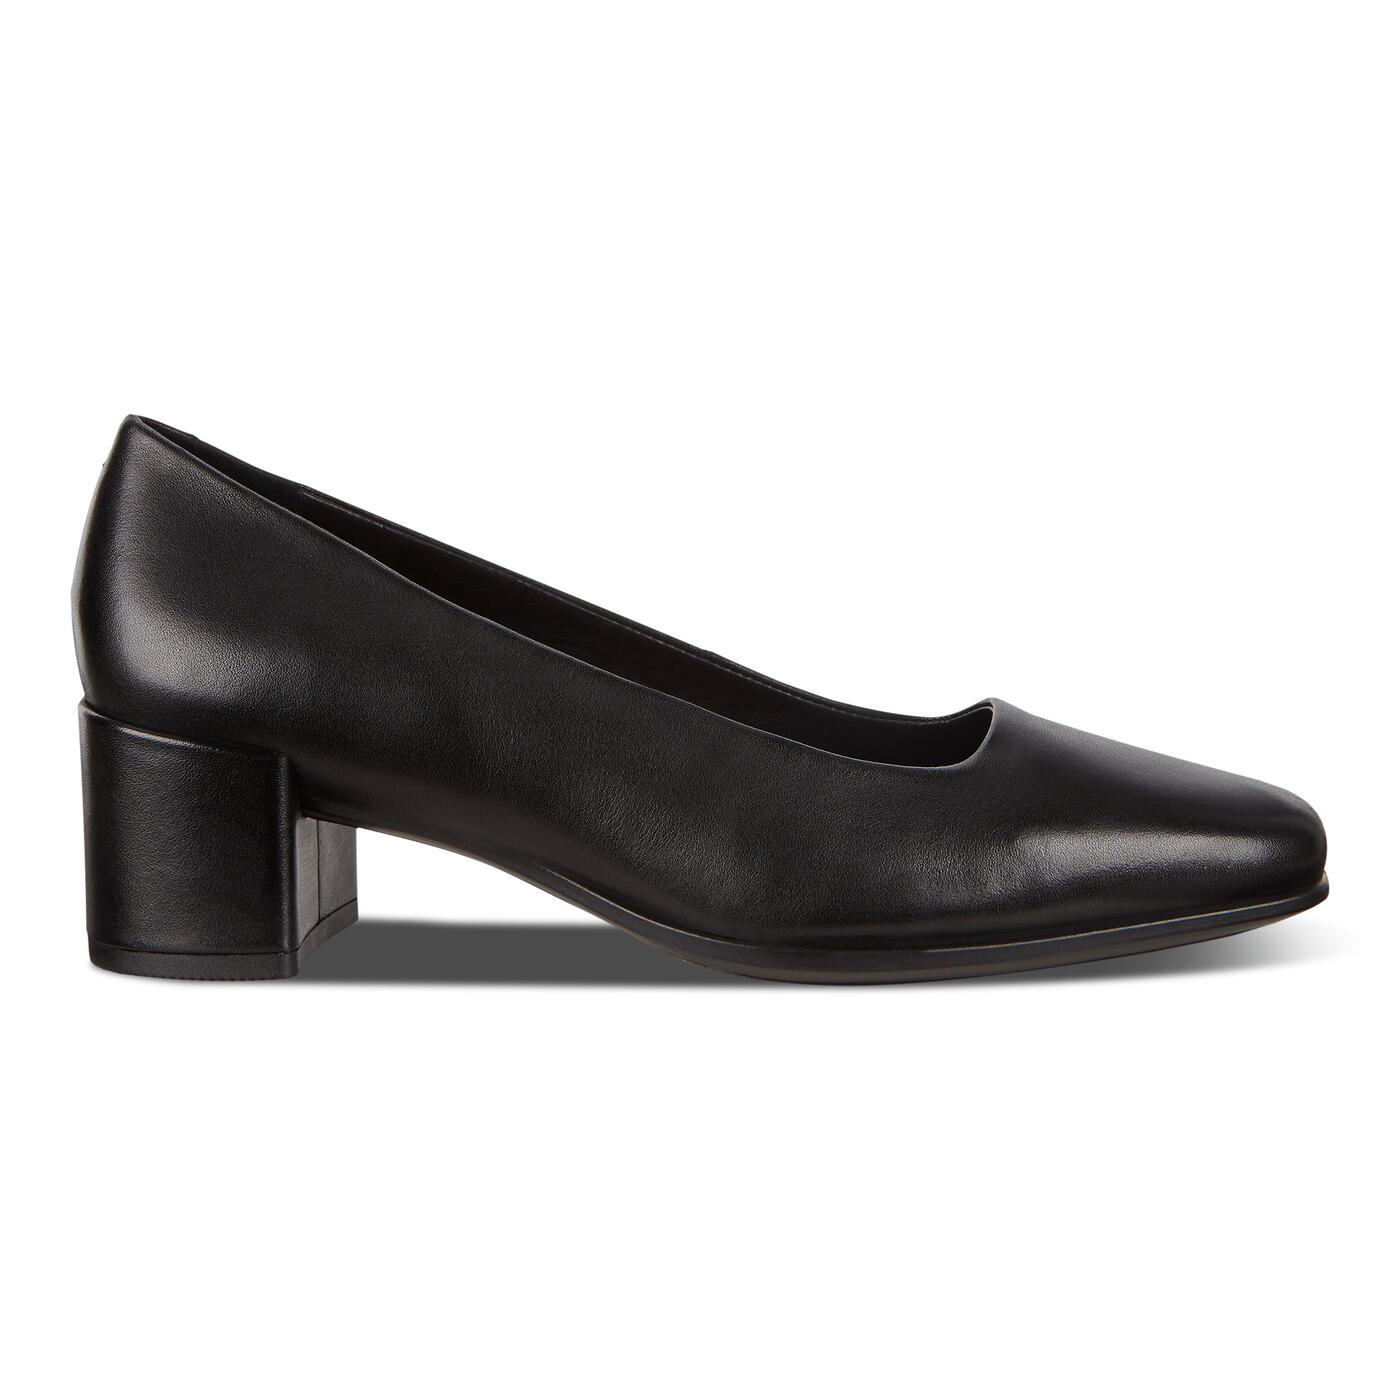 UPC 825840480986 product image for ECCO Women's Shape 35 Squared Pump Size 5 Leather Black | upcitemdb.com